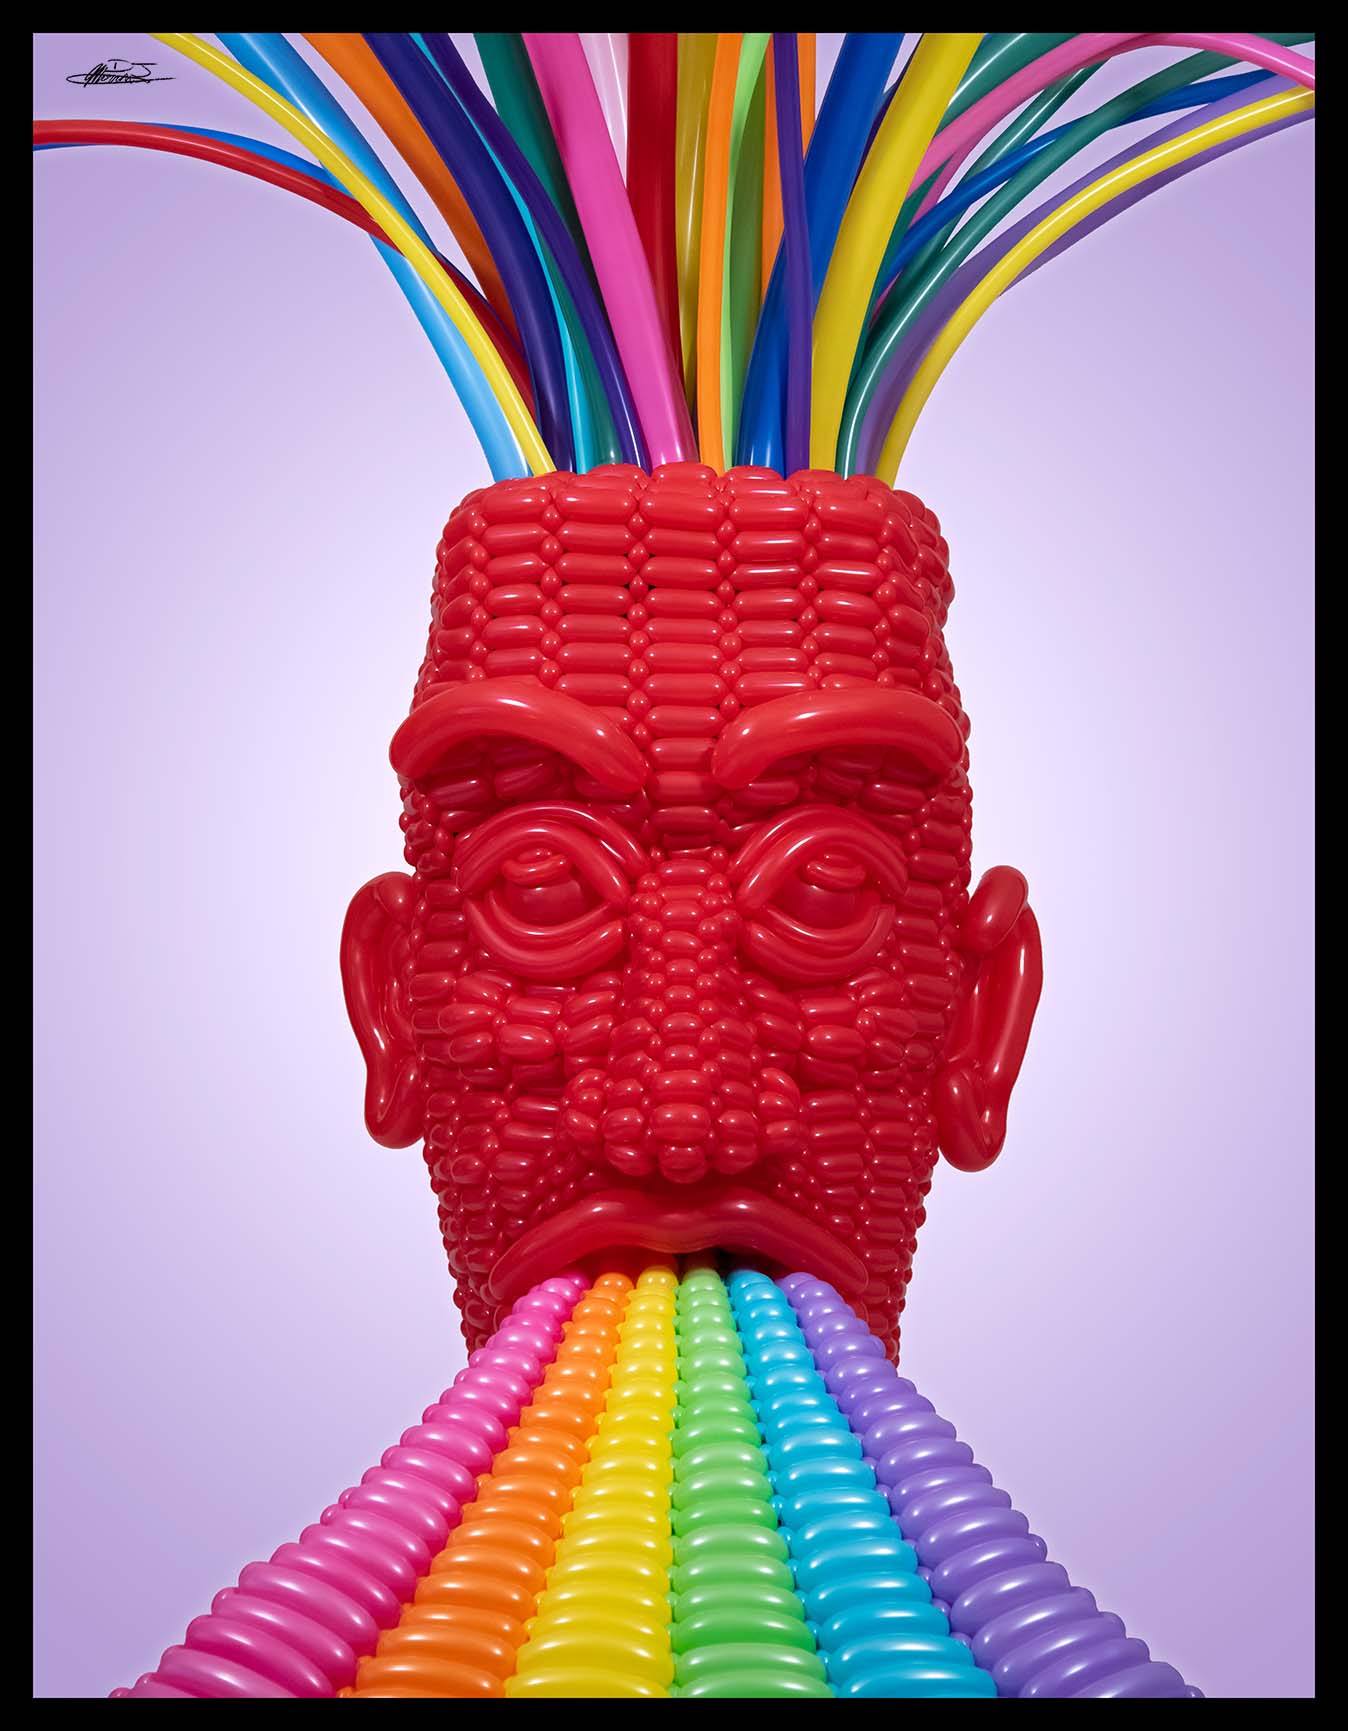 Stratification balloon sculpture of giant red head with colored balloons flowing into the top, vomitting out a rainbow